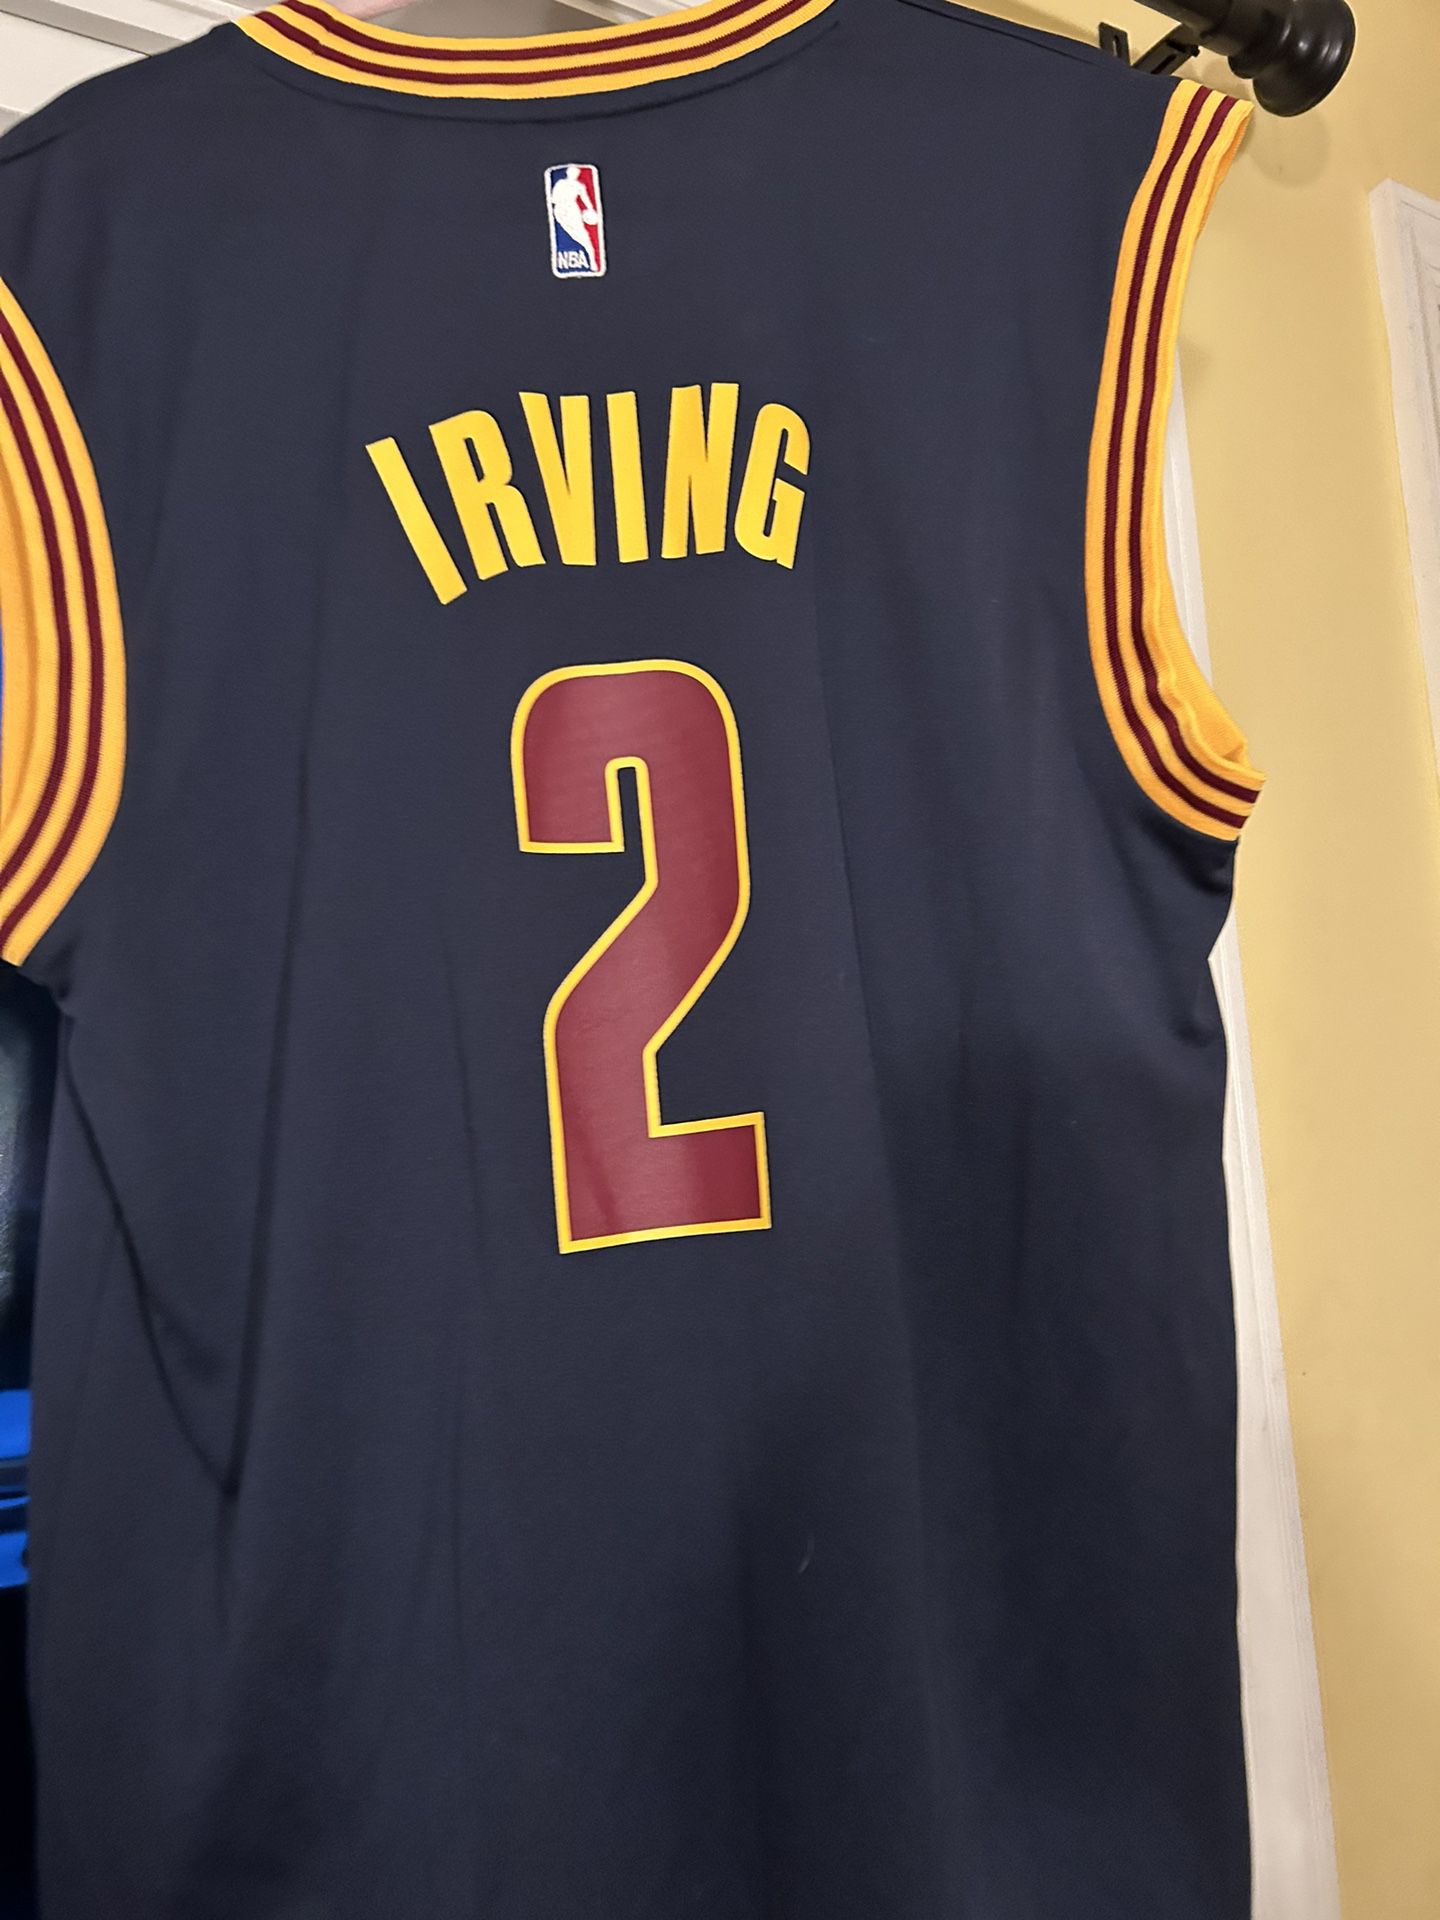 Kyrie Irving Cavs Jersey for Sale in Greenlawn, NY - OfferUp